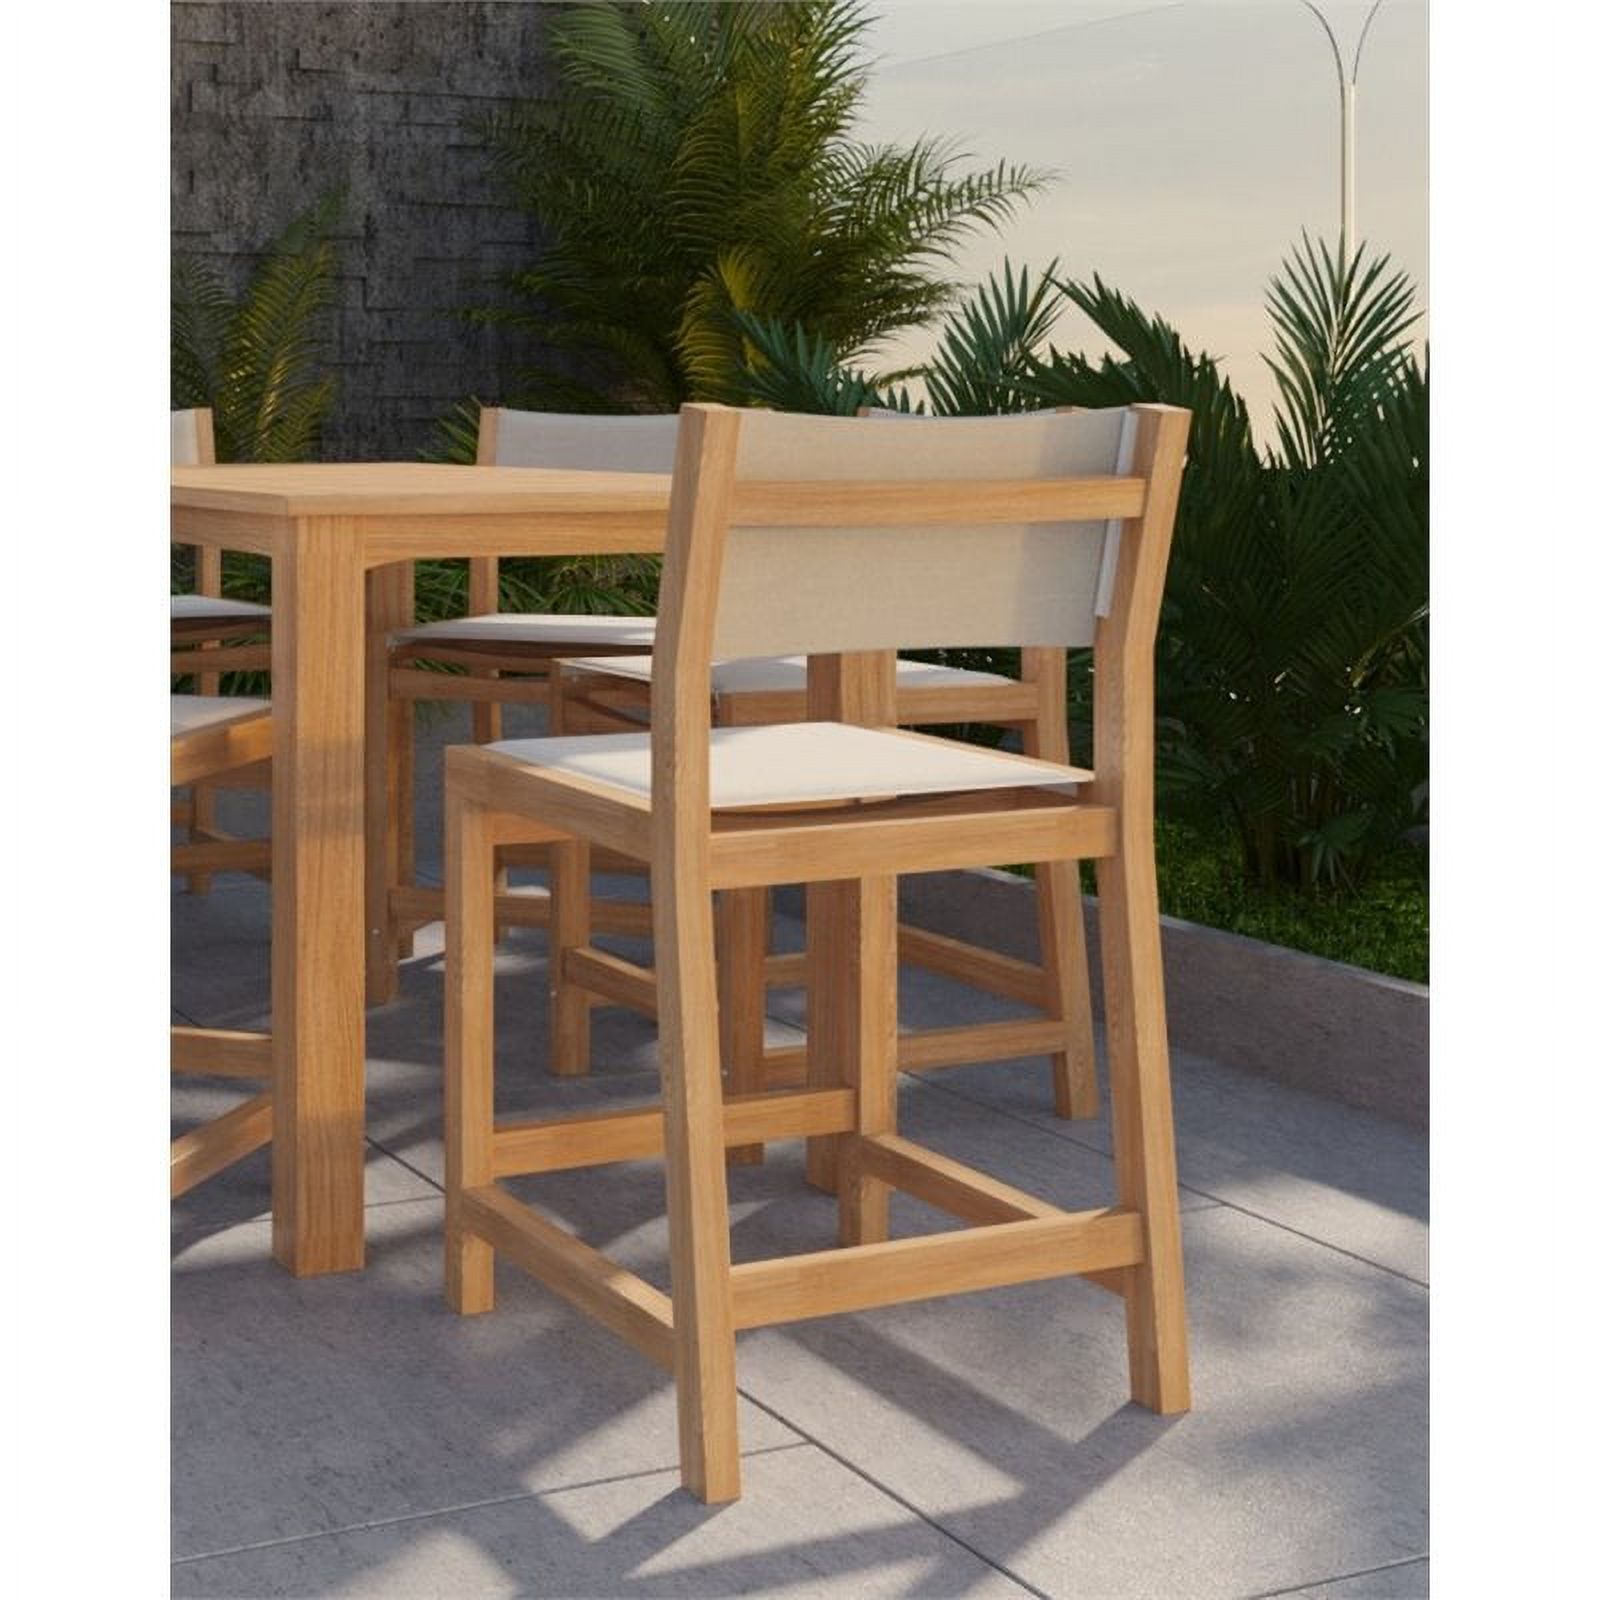 Home Square 26" Teak Wooden Patio Counter Stool in Natural and White - Set of 2 - image 3 of 4